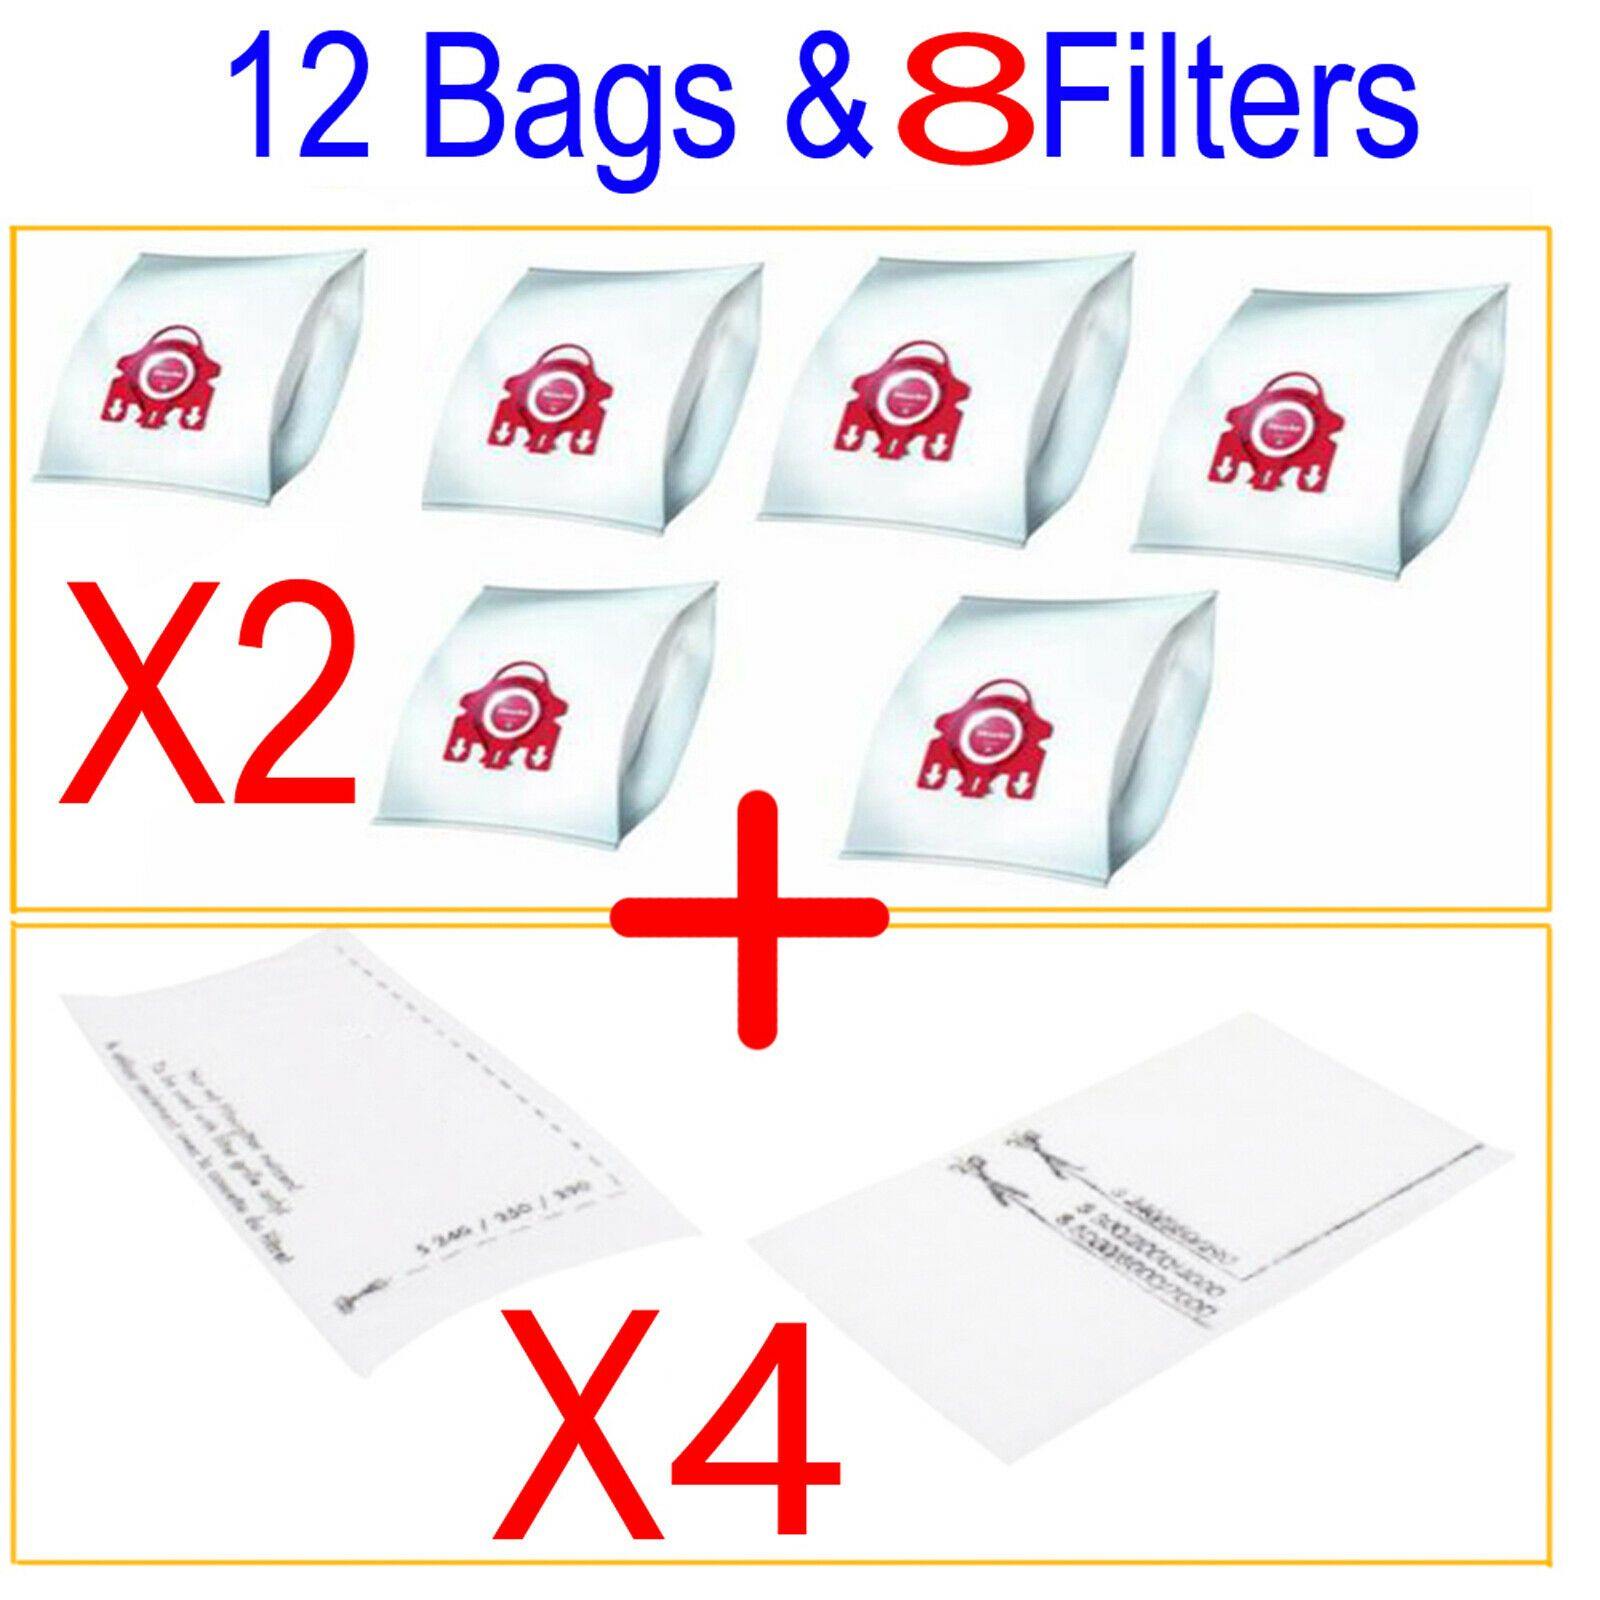 12 Dust Bag & 8 Filter For Miele Vacuum Cleaner Carina S4210 Capella S4211 Sparesbarn